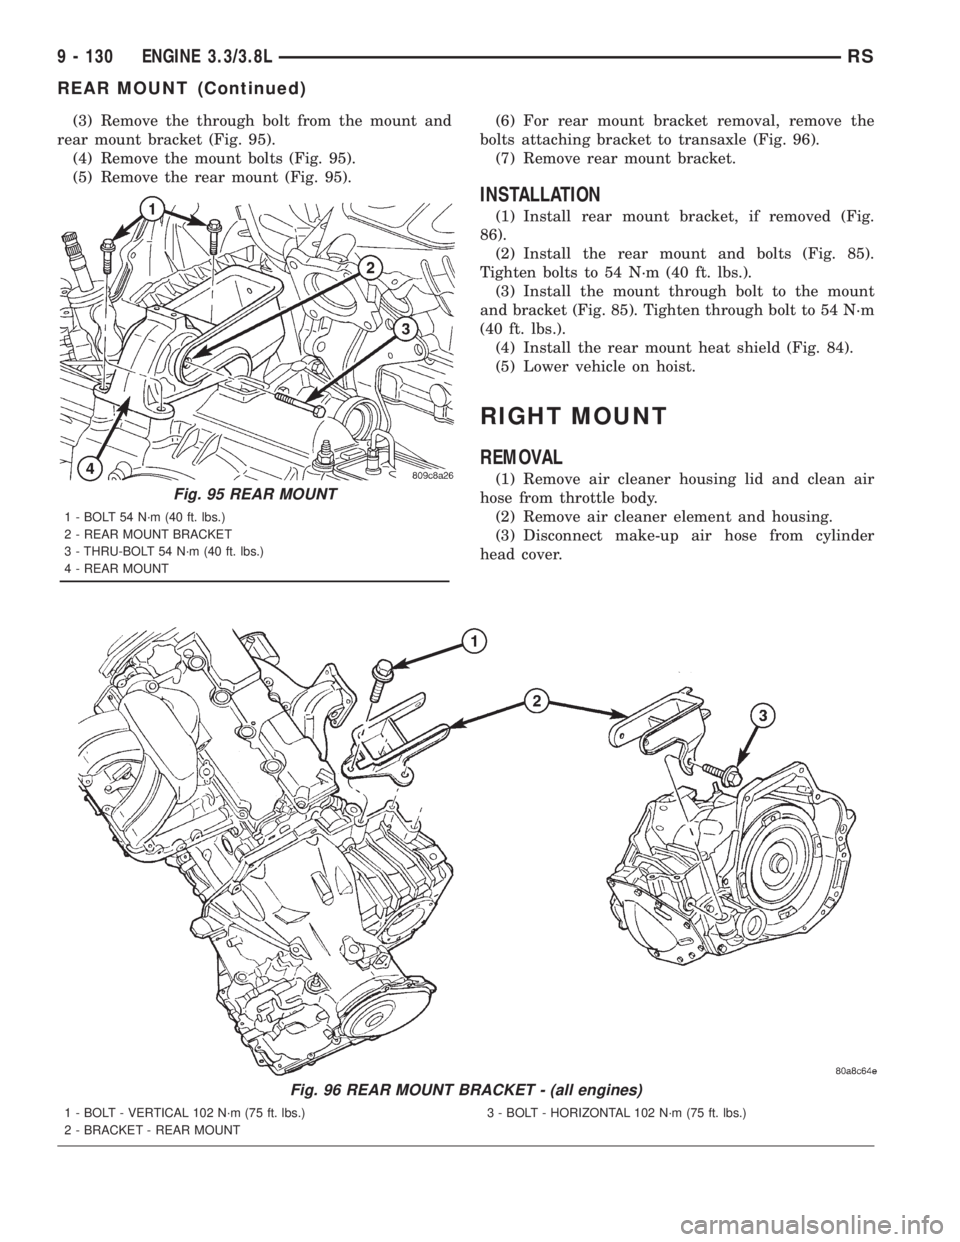 CHRYSLER VOYAGER 2001  Service Manual (3) Remove the through bolt from the mount and
rear mount bracket (Fig. 95).
(4) Remove the mount bolts (Fig. 95).
(5) Remove the rear mount (Fig. 95).(6) For rear mount bracket removal, remove the
bo